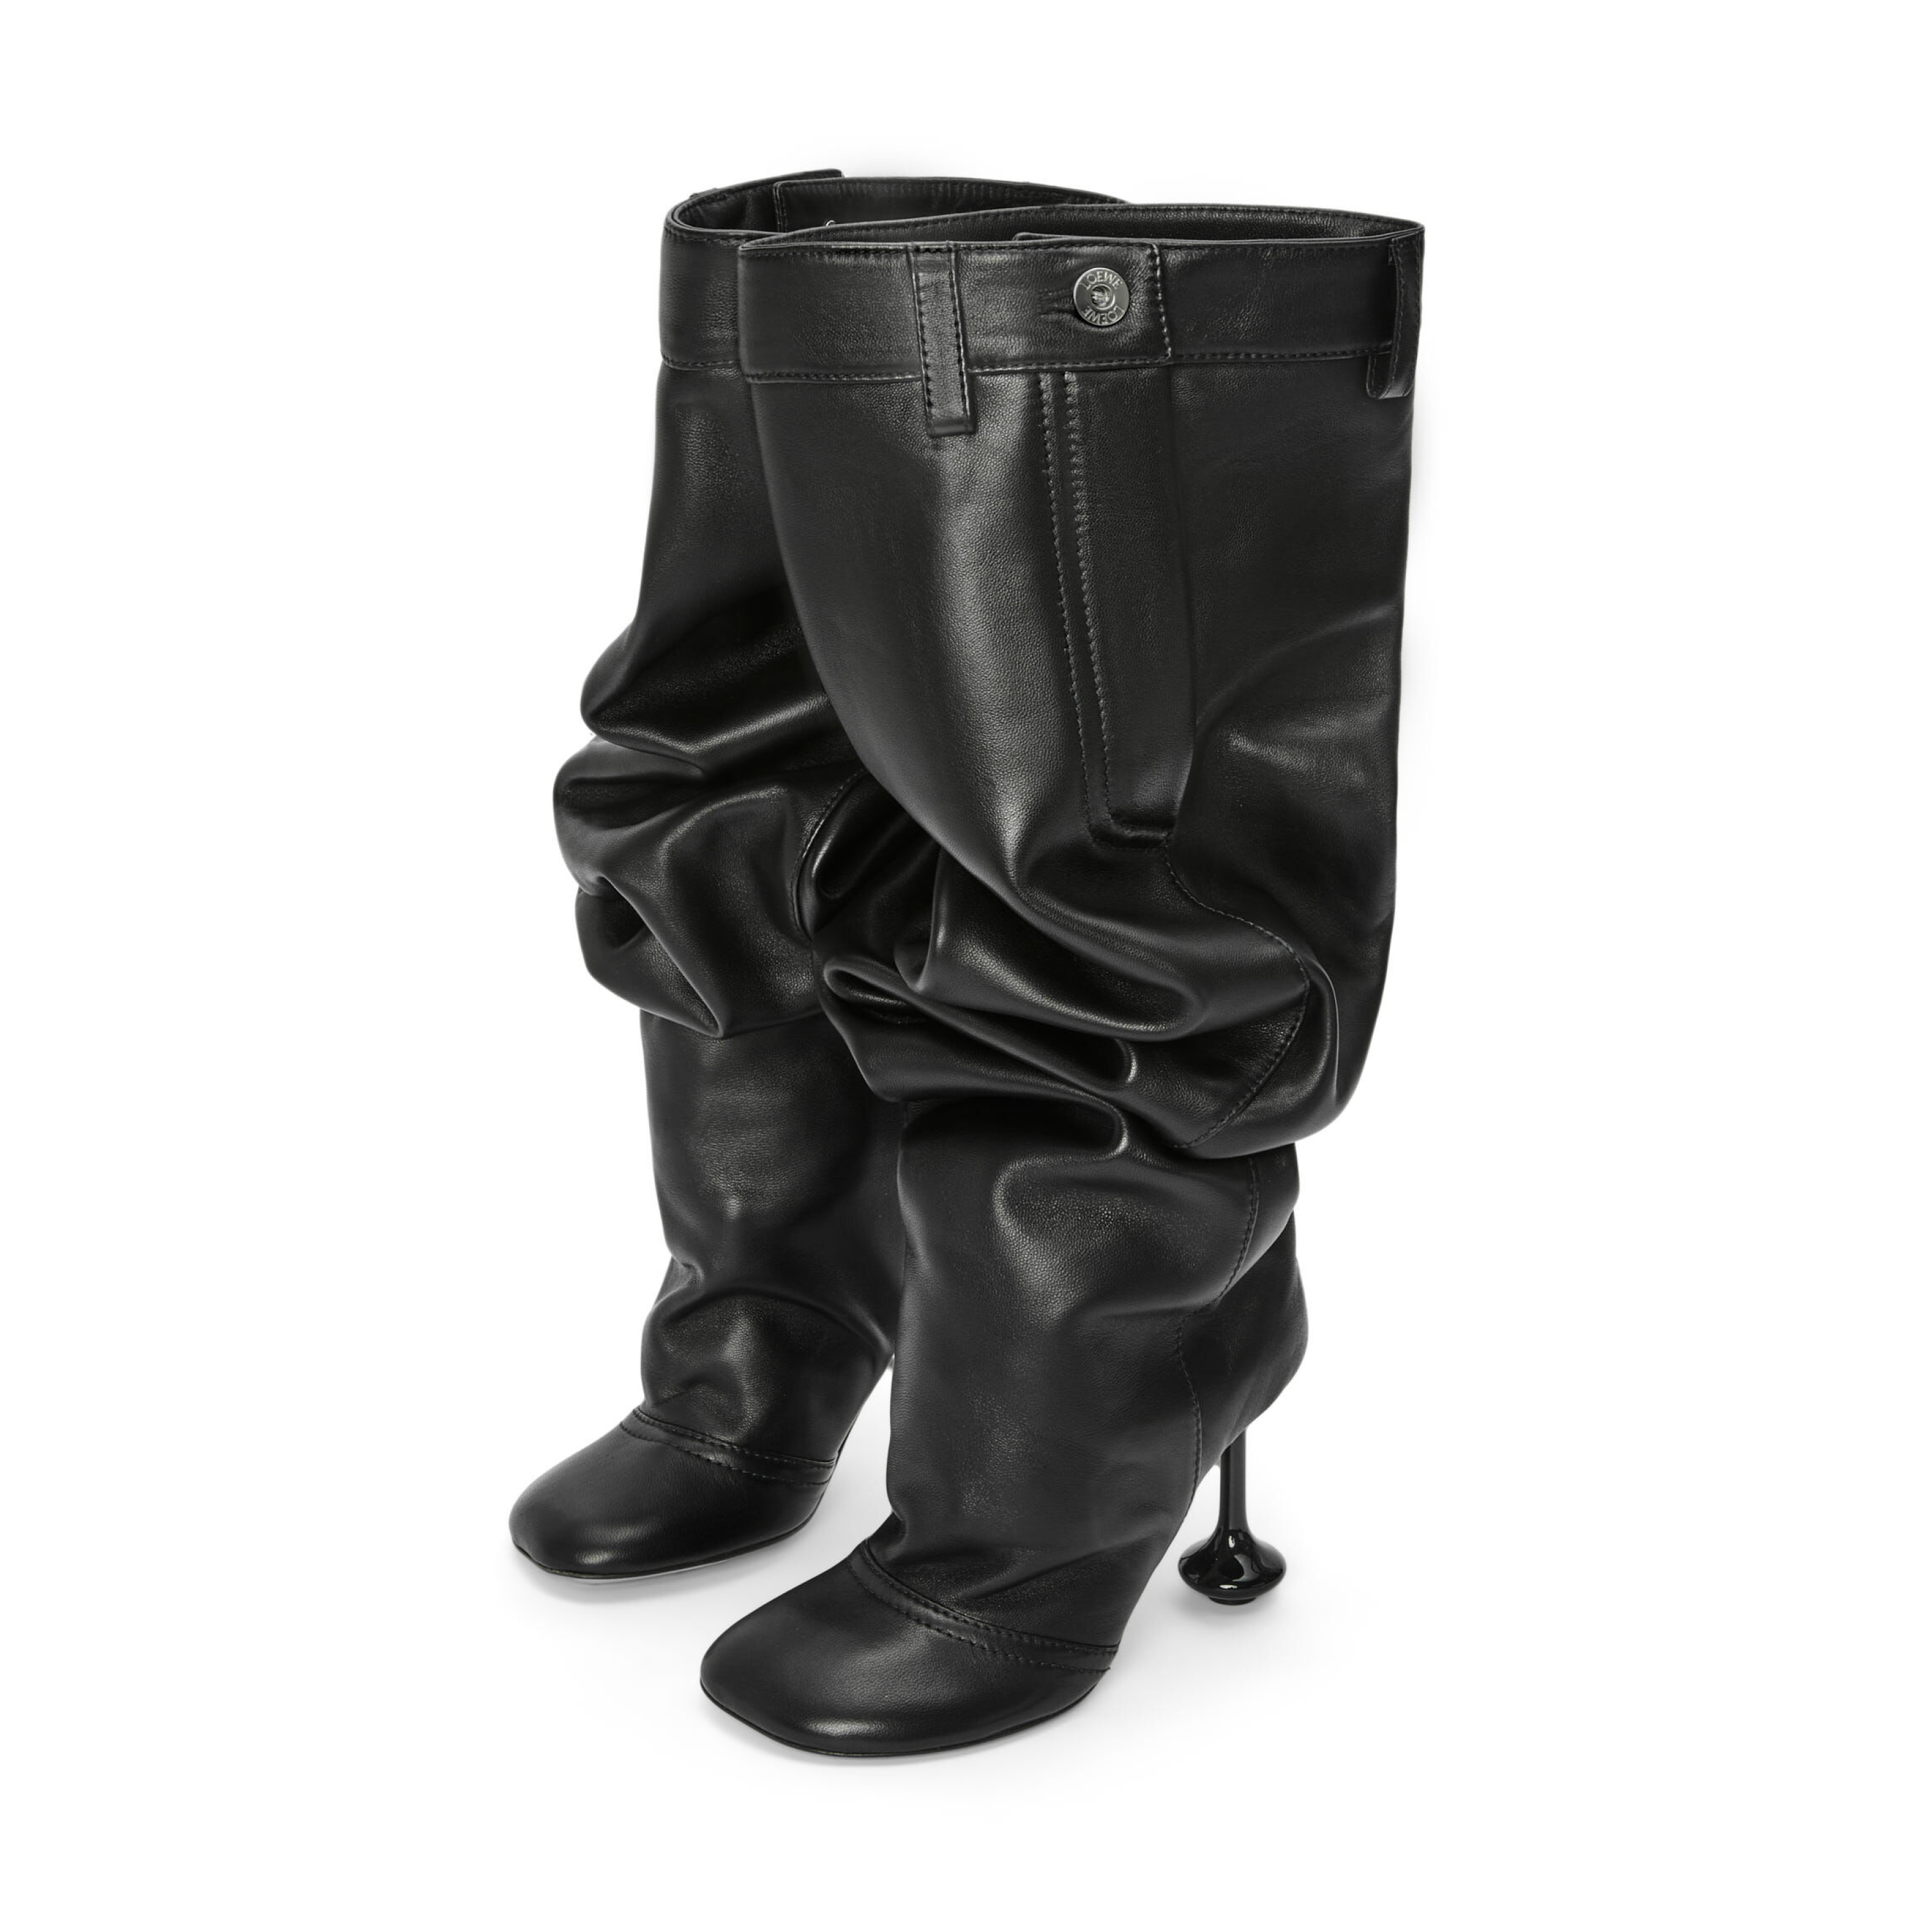 Toy Over The Knee Boot in Nappa Lambskin